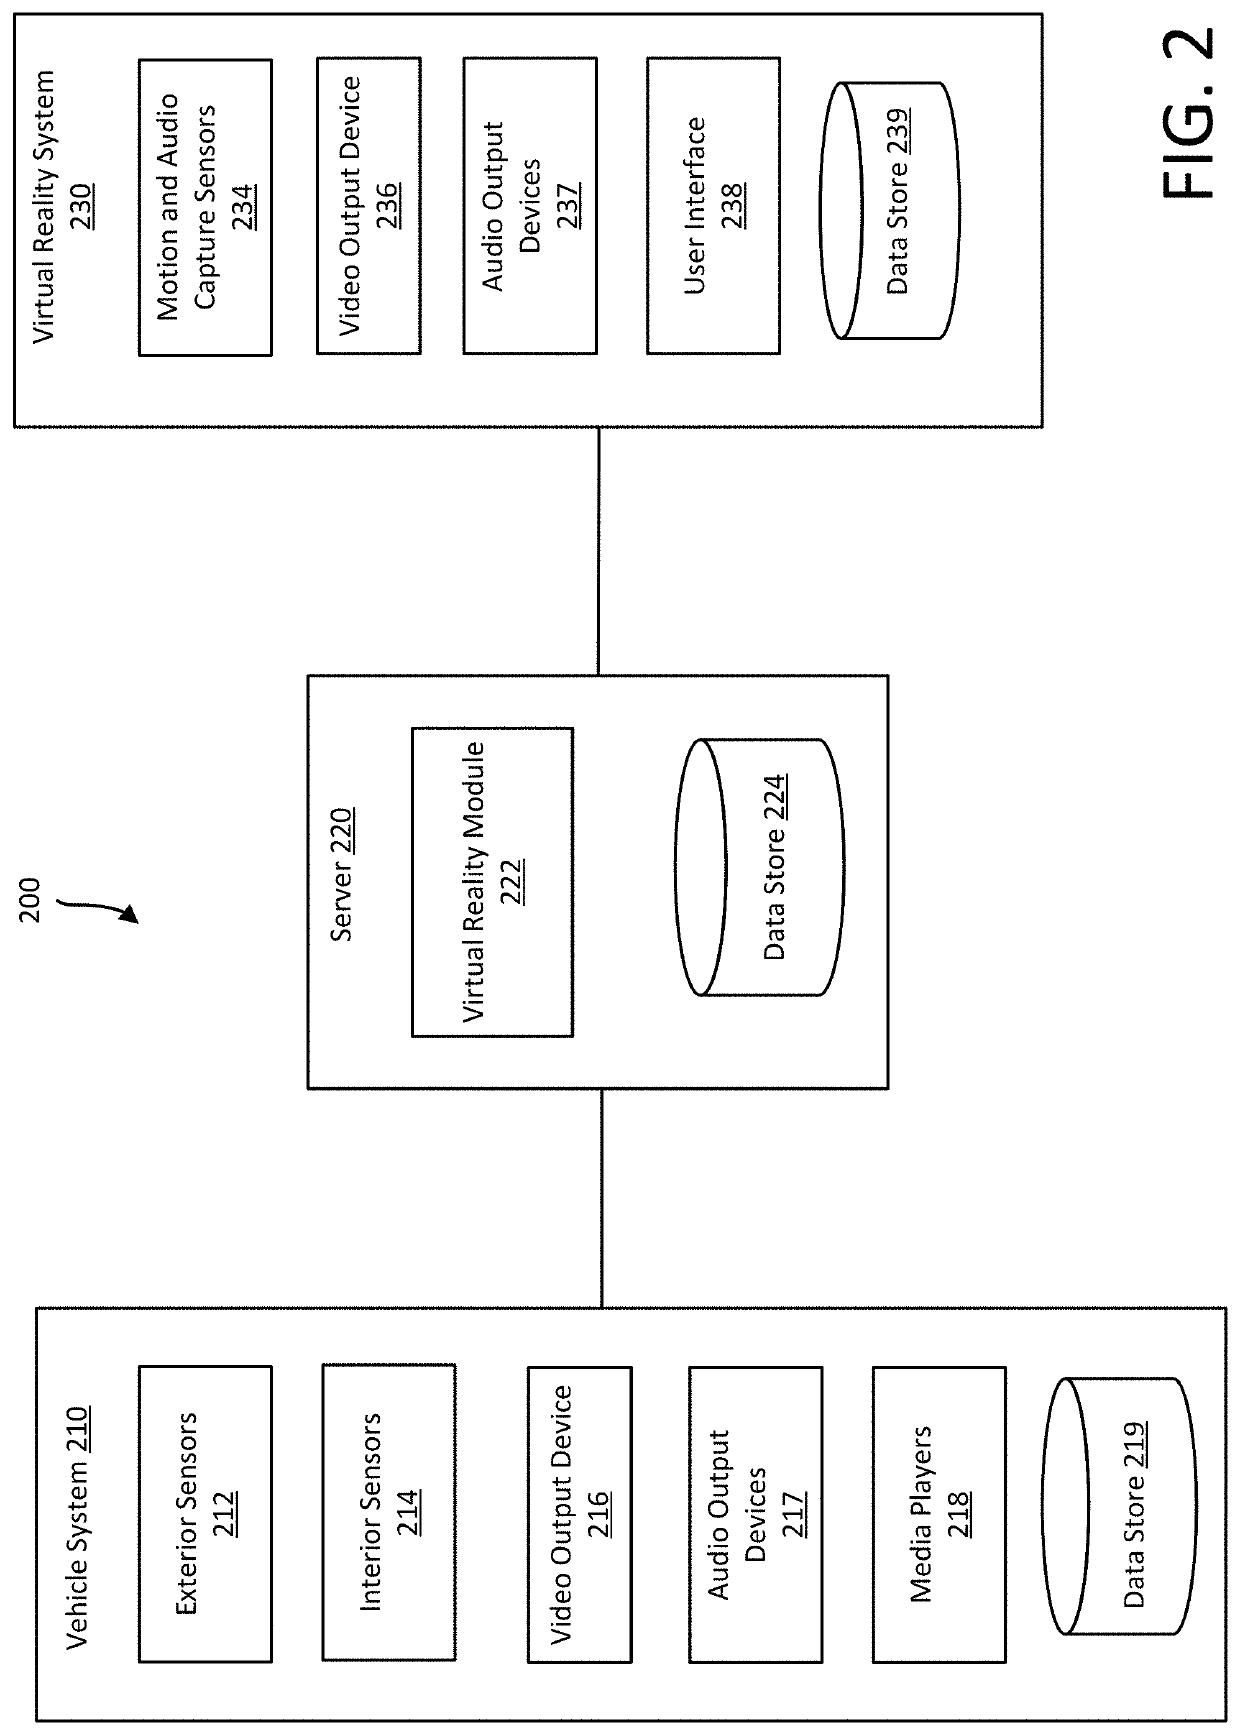 Shared environment for vehicle occupant and remote user